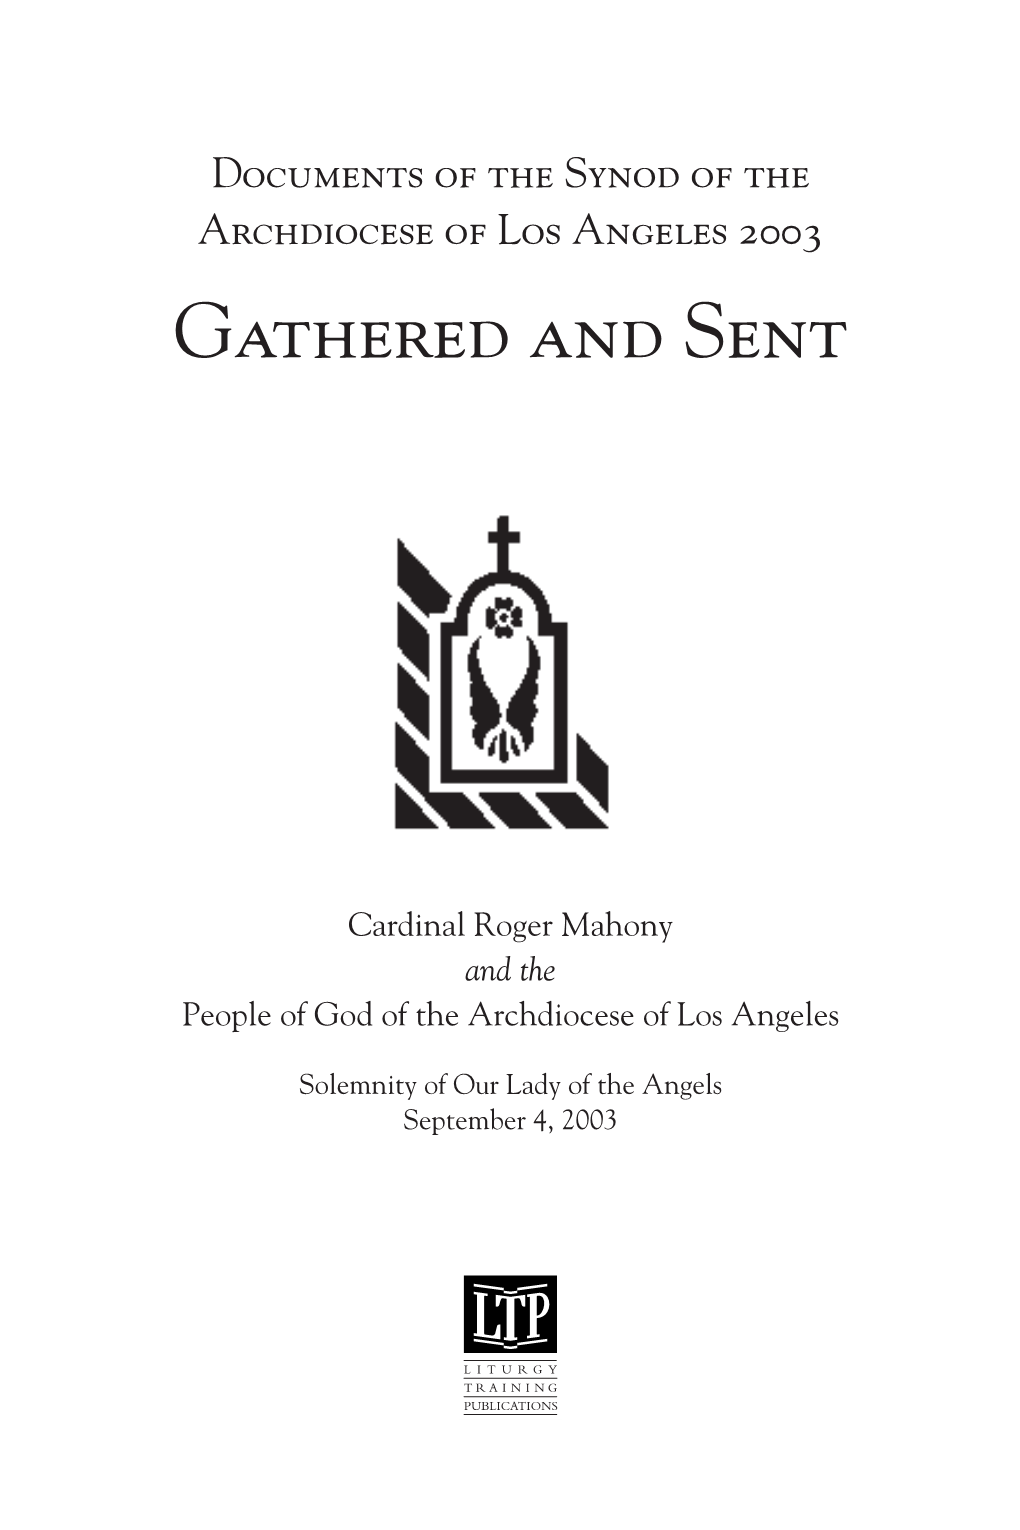 Gathered and Sent, Documents of the Synod of the Archdiocese of Los